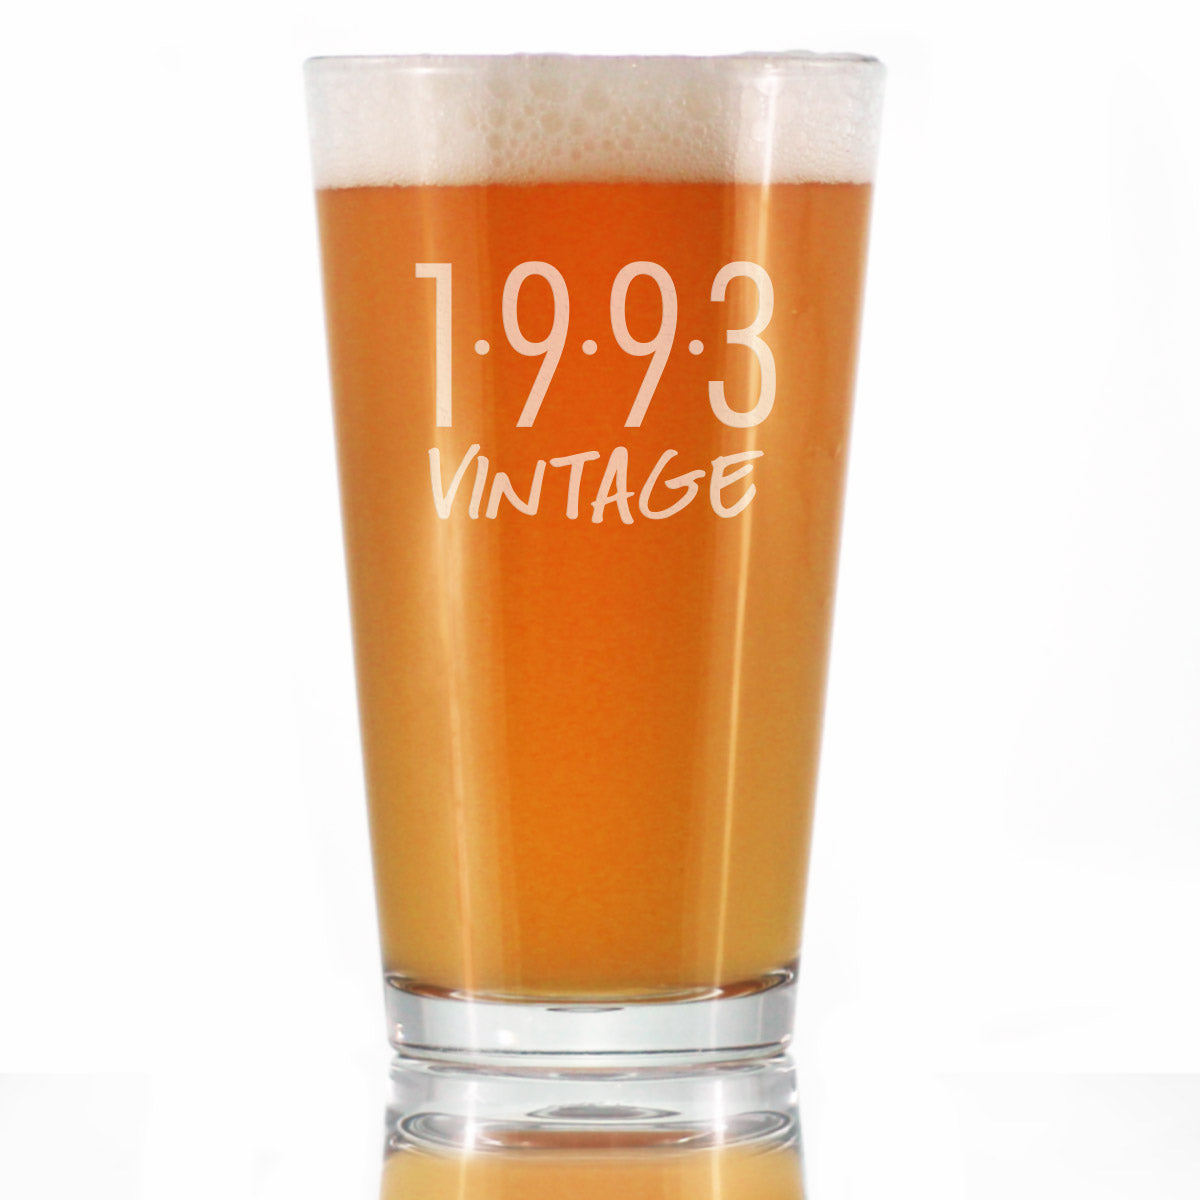 Vintage 1993 - Pint Glass for Beer - 31st Birthday Gifts for Men or Women Turning 31 - Fun Bday Party Decor - 16 oz